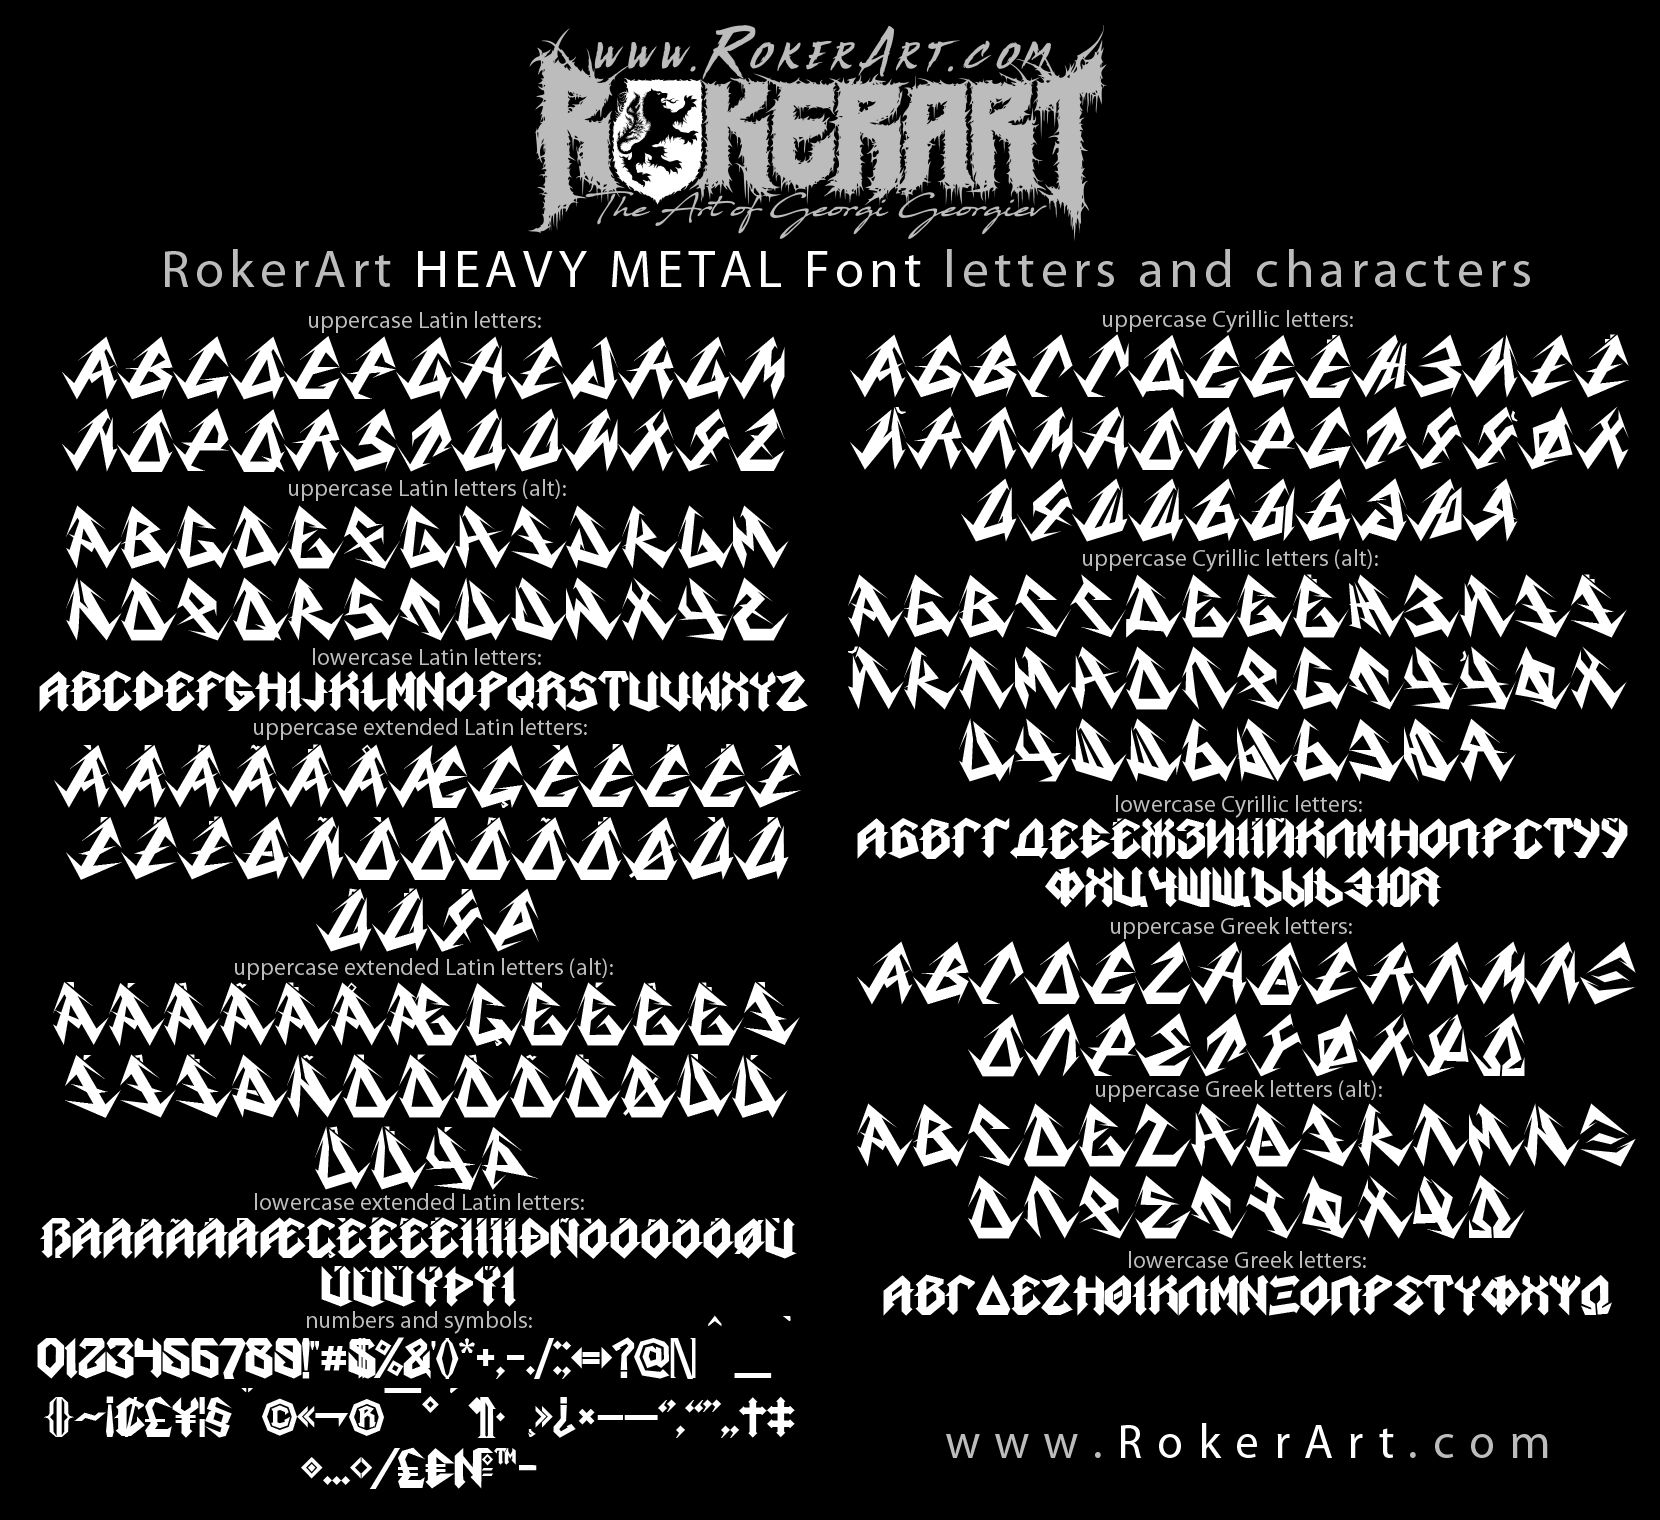 RokerArt HEAVY METAL Font letters and characters